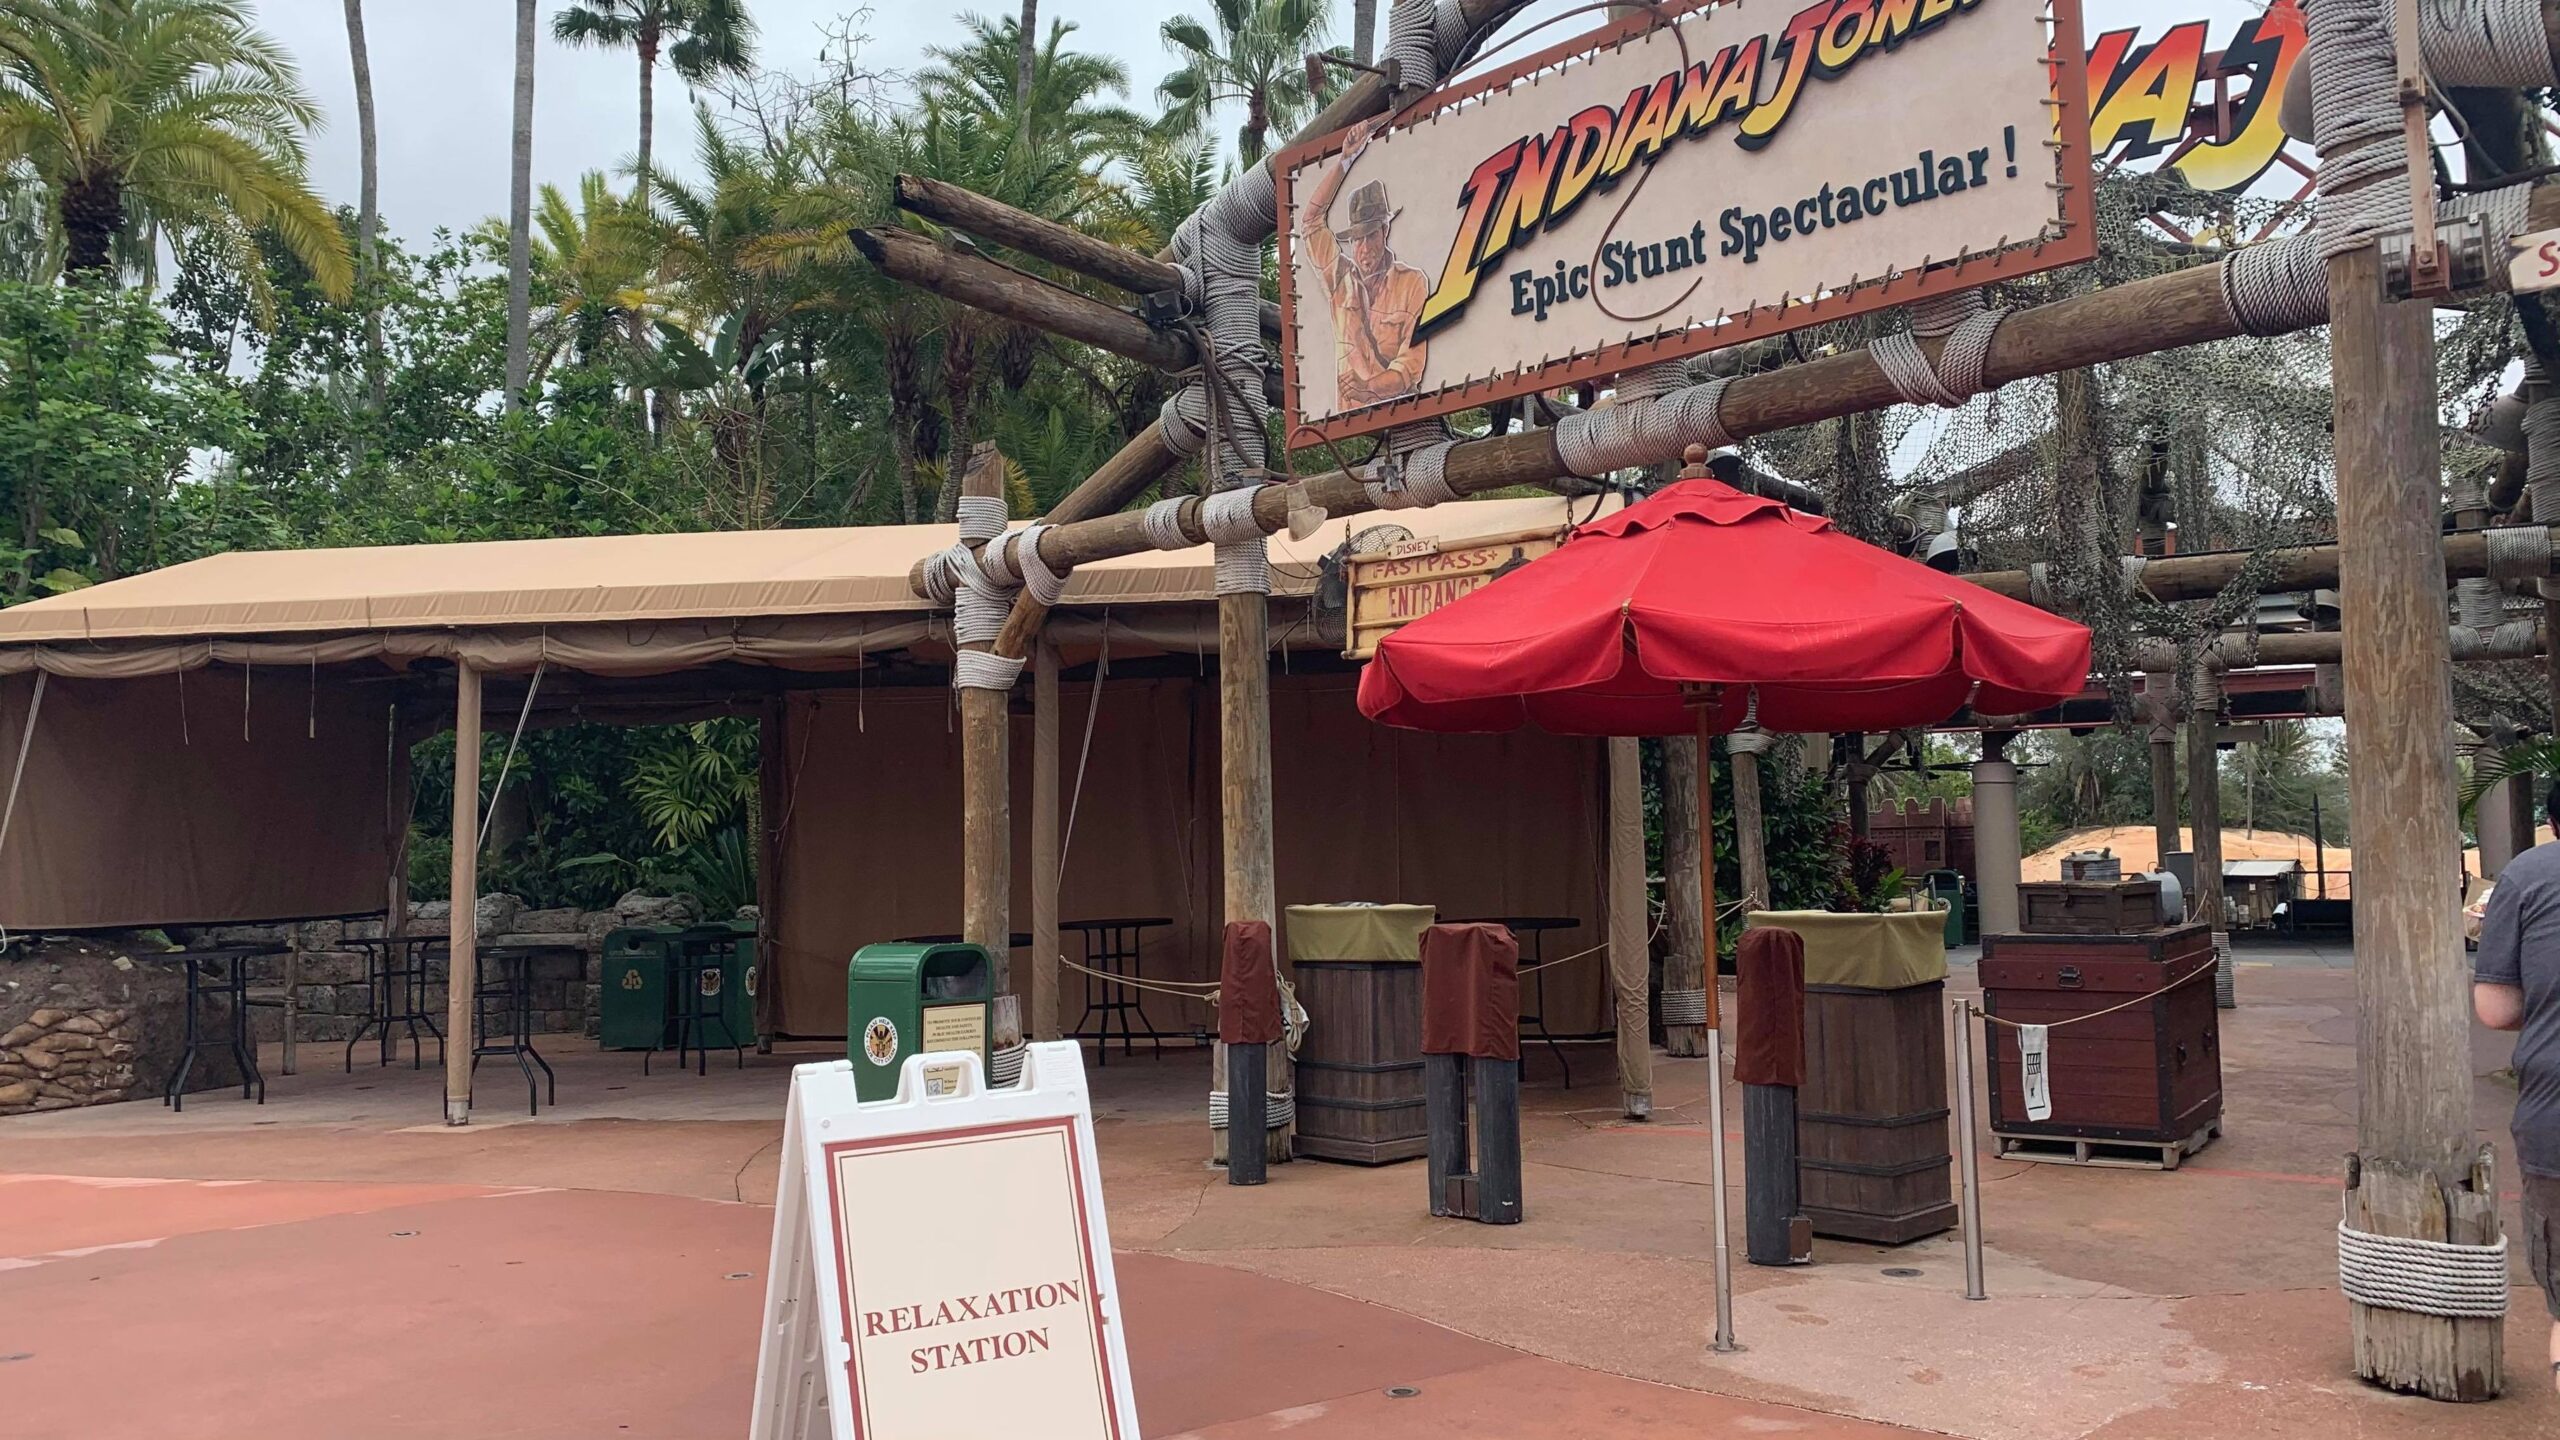 Hollywood Studios has a new relaxation station